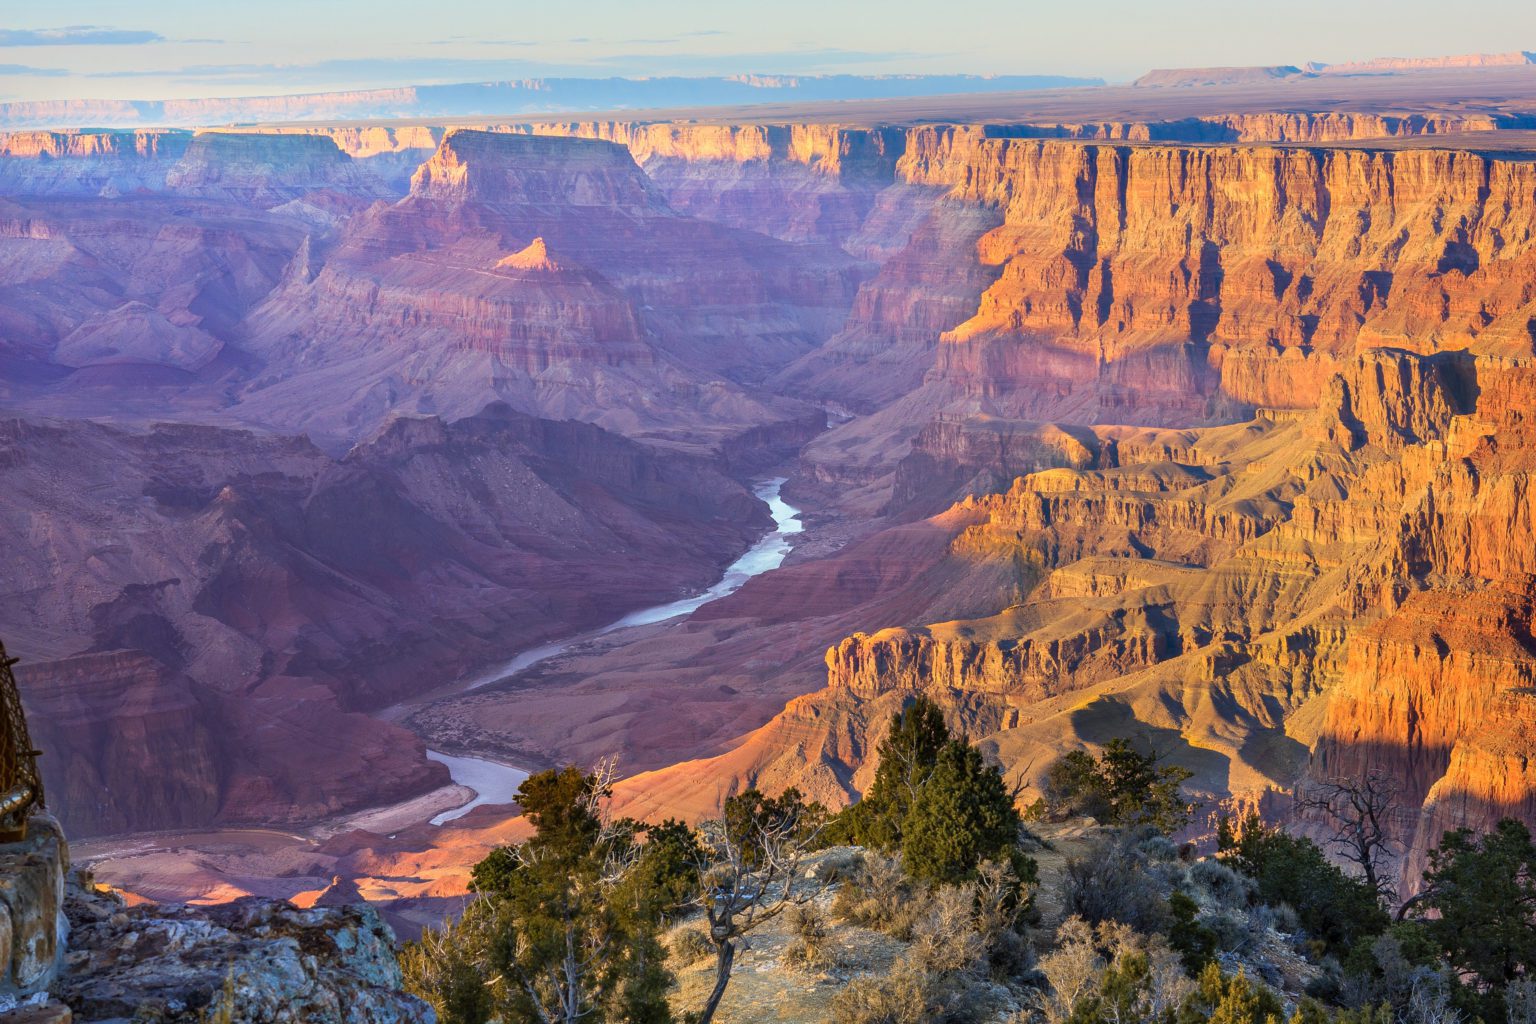 Beautiful Landscape of Grand Canyon from Desert View Point with the Colorado River visible during dusk